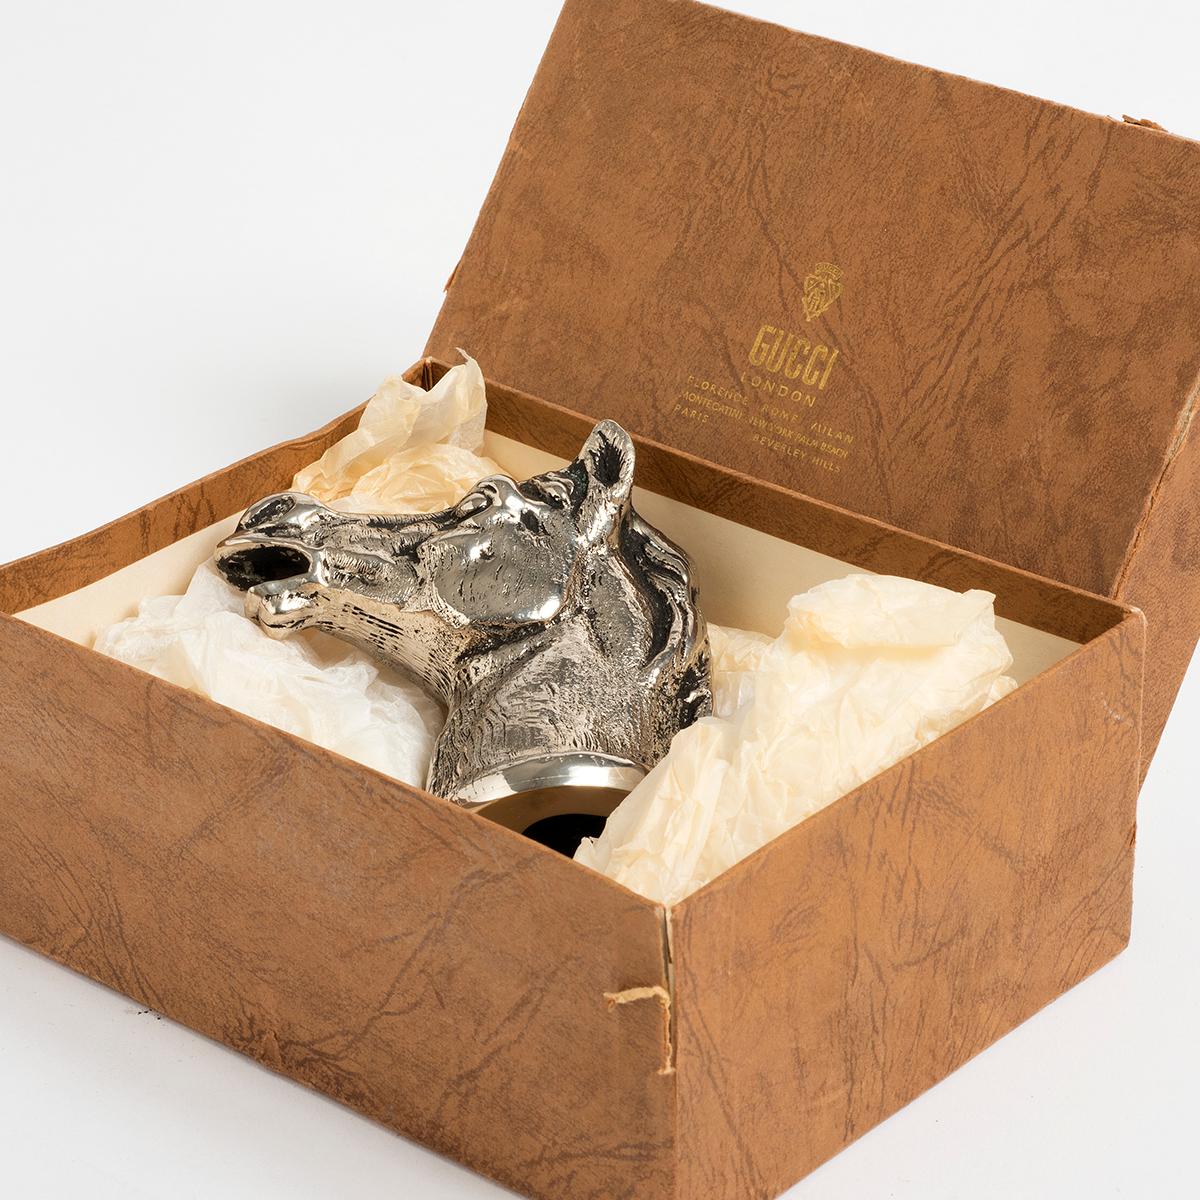 Our vintage Gucci horse head bottle opener in silver plate is signed Gucci Made in Italy and measures 8cm x 8cm. Of all the accessories released by Gucci in the 1970s, the horse head is perhaps the most true to the Gucci design themes, horse-bit